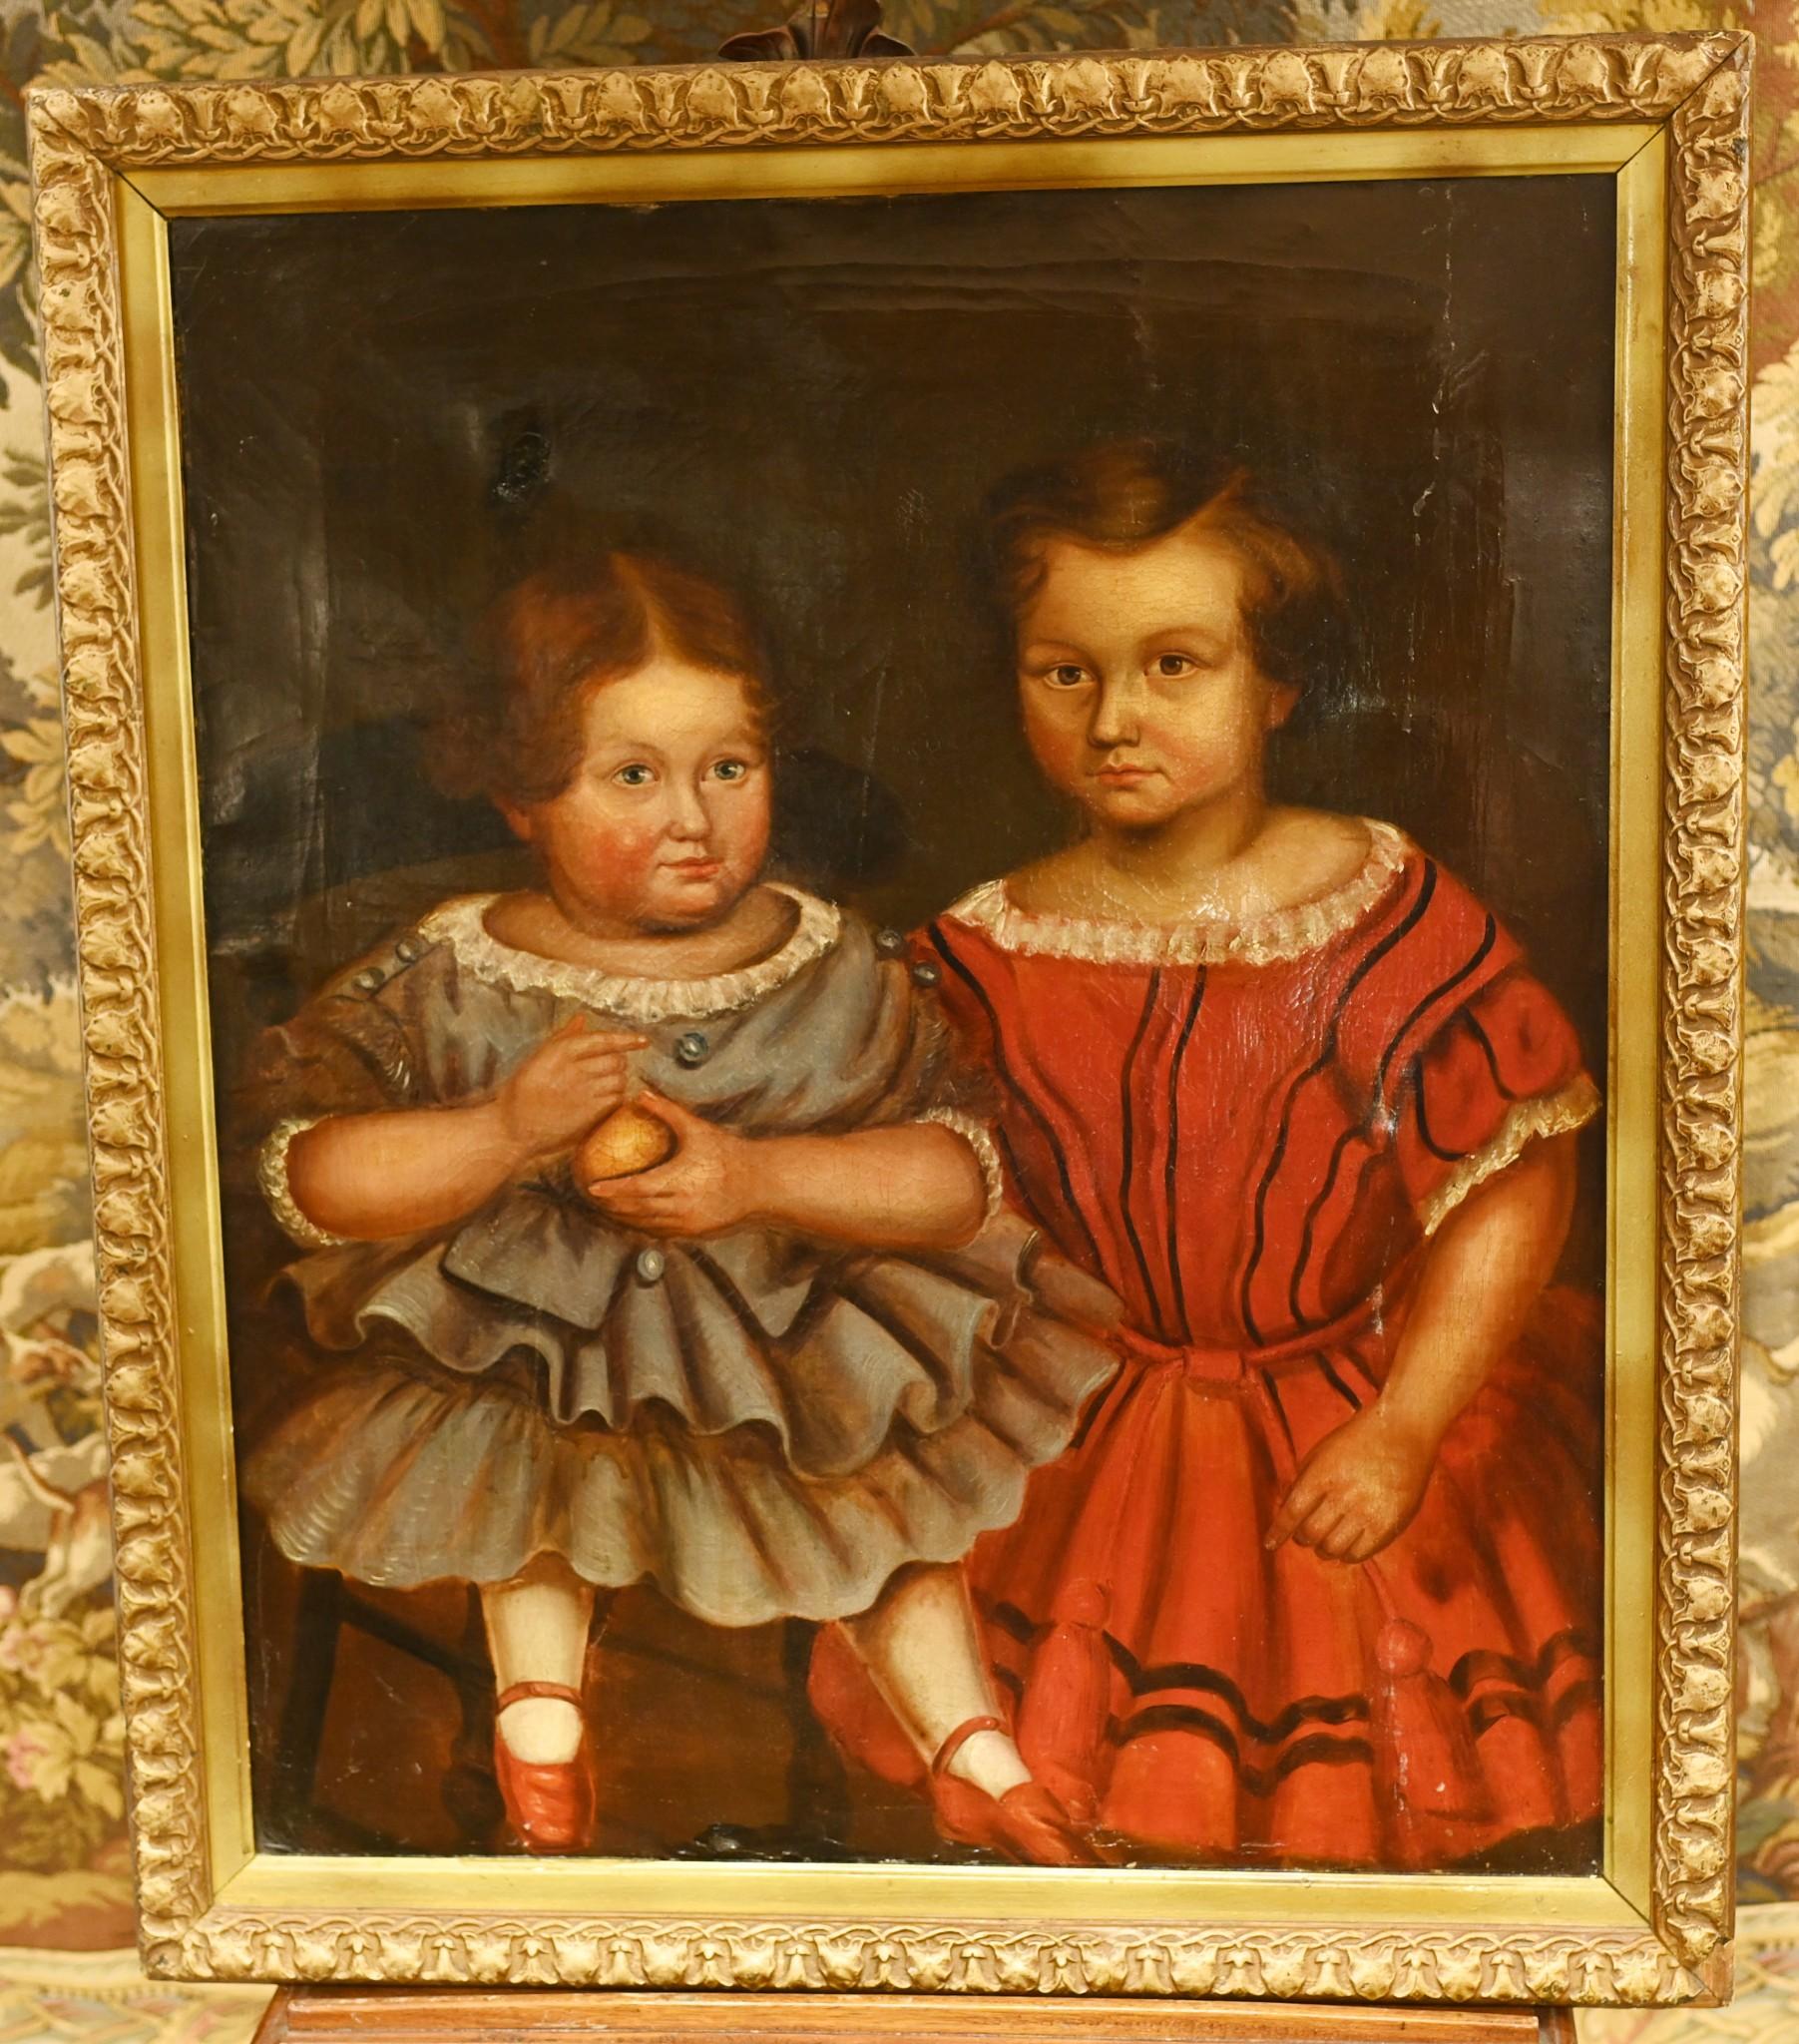 You are viewing a gorgeous American primitive oil painting of two girls
This quirky portrait is a wonderful piece of folk art
Circa 1840
Wonderful effect of craquelure from the age of the painting which adds value and character
Comes in the gilt